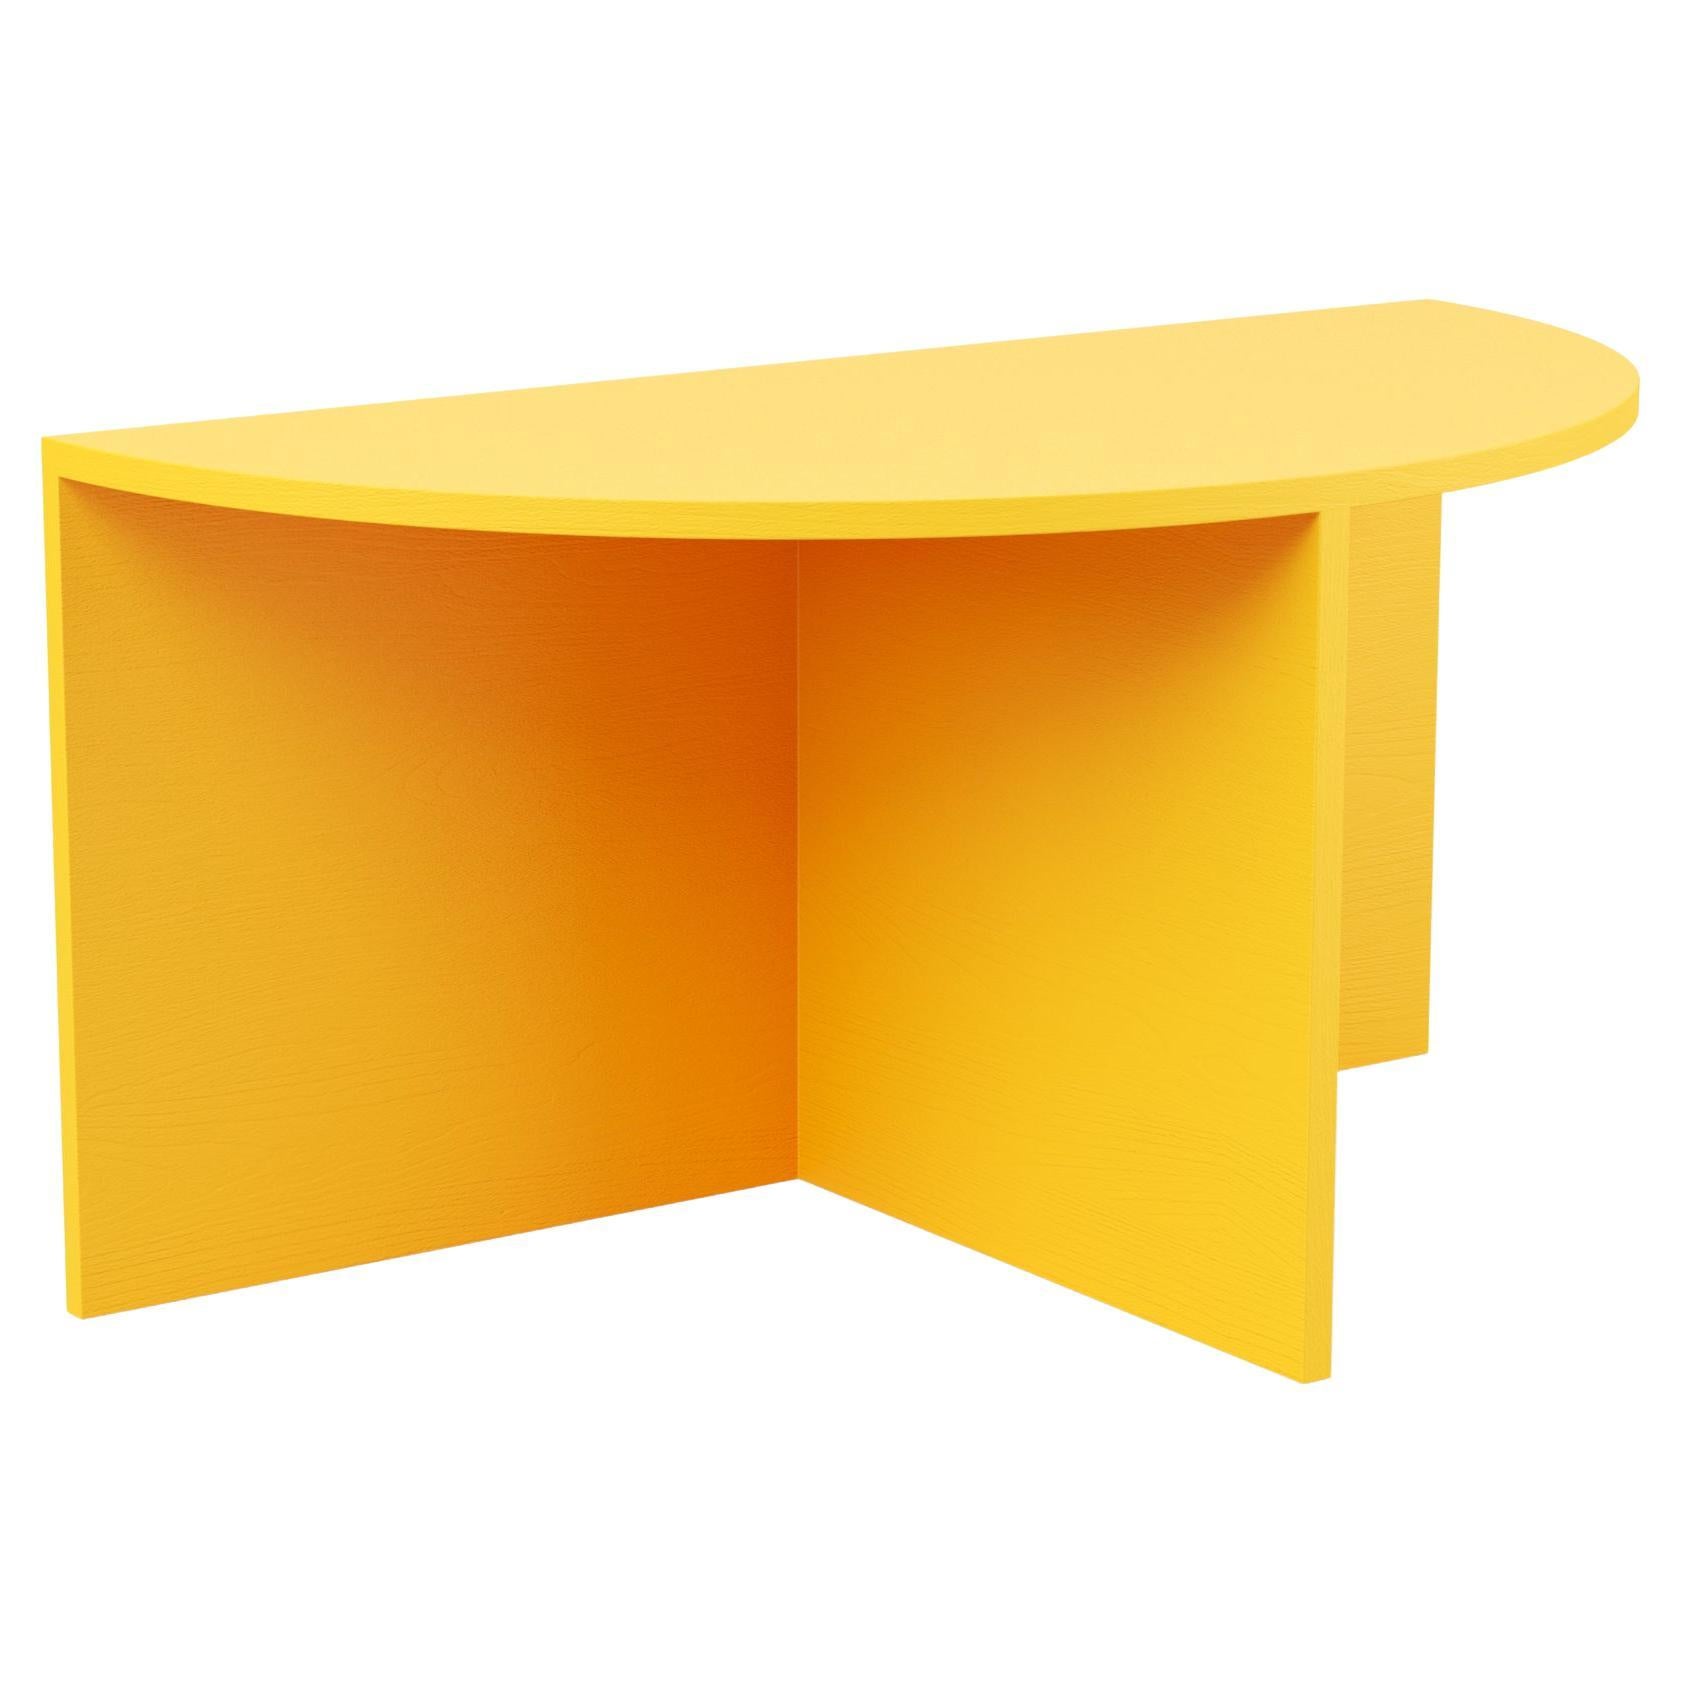 Hayche Pie Chart System 1/2 Table, Yellow, Solid Wood, UK, Made To Order For Sale